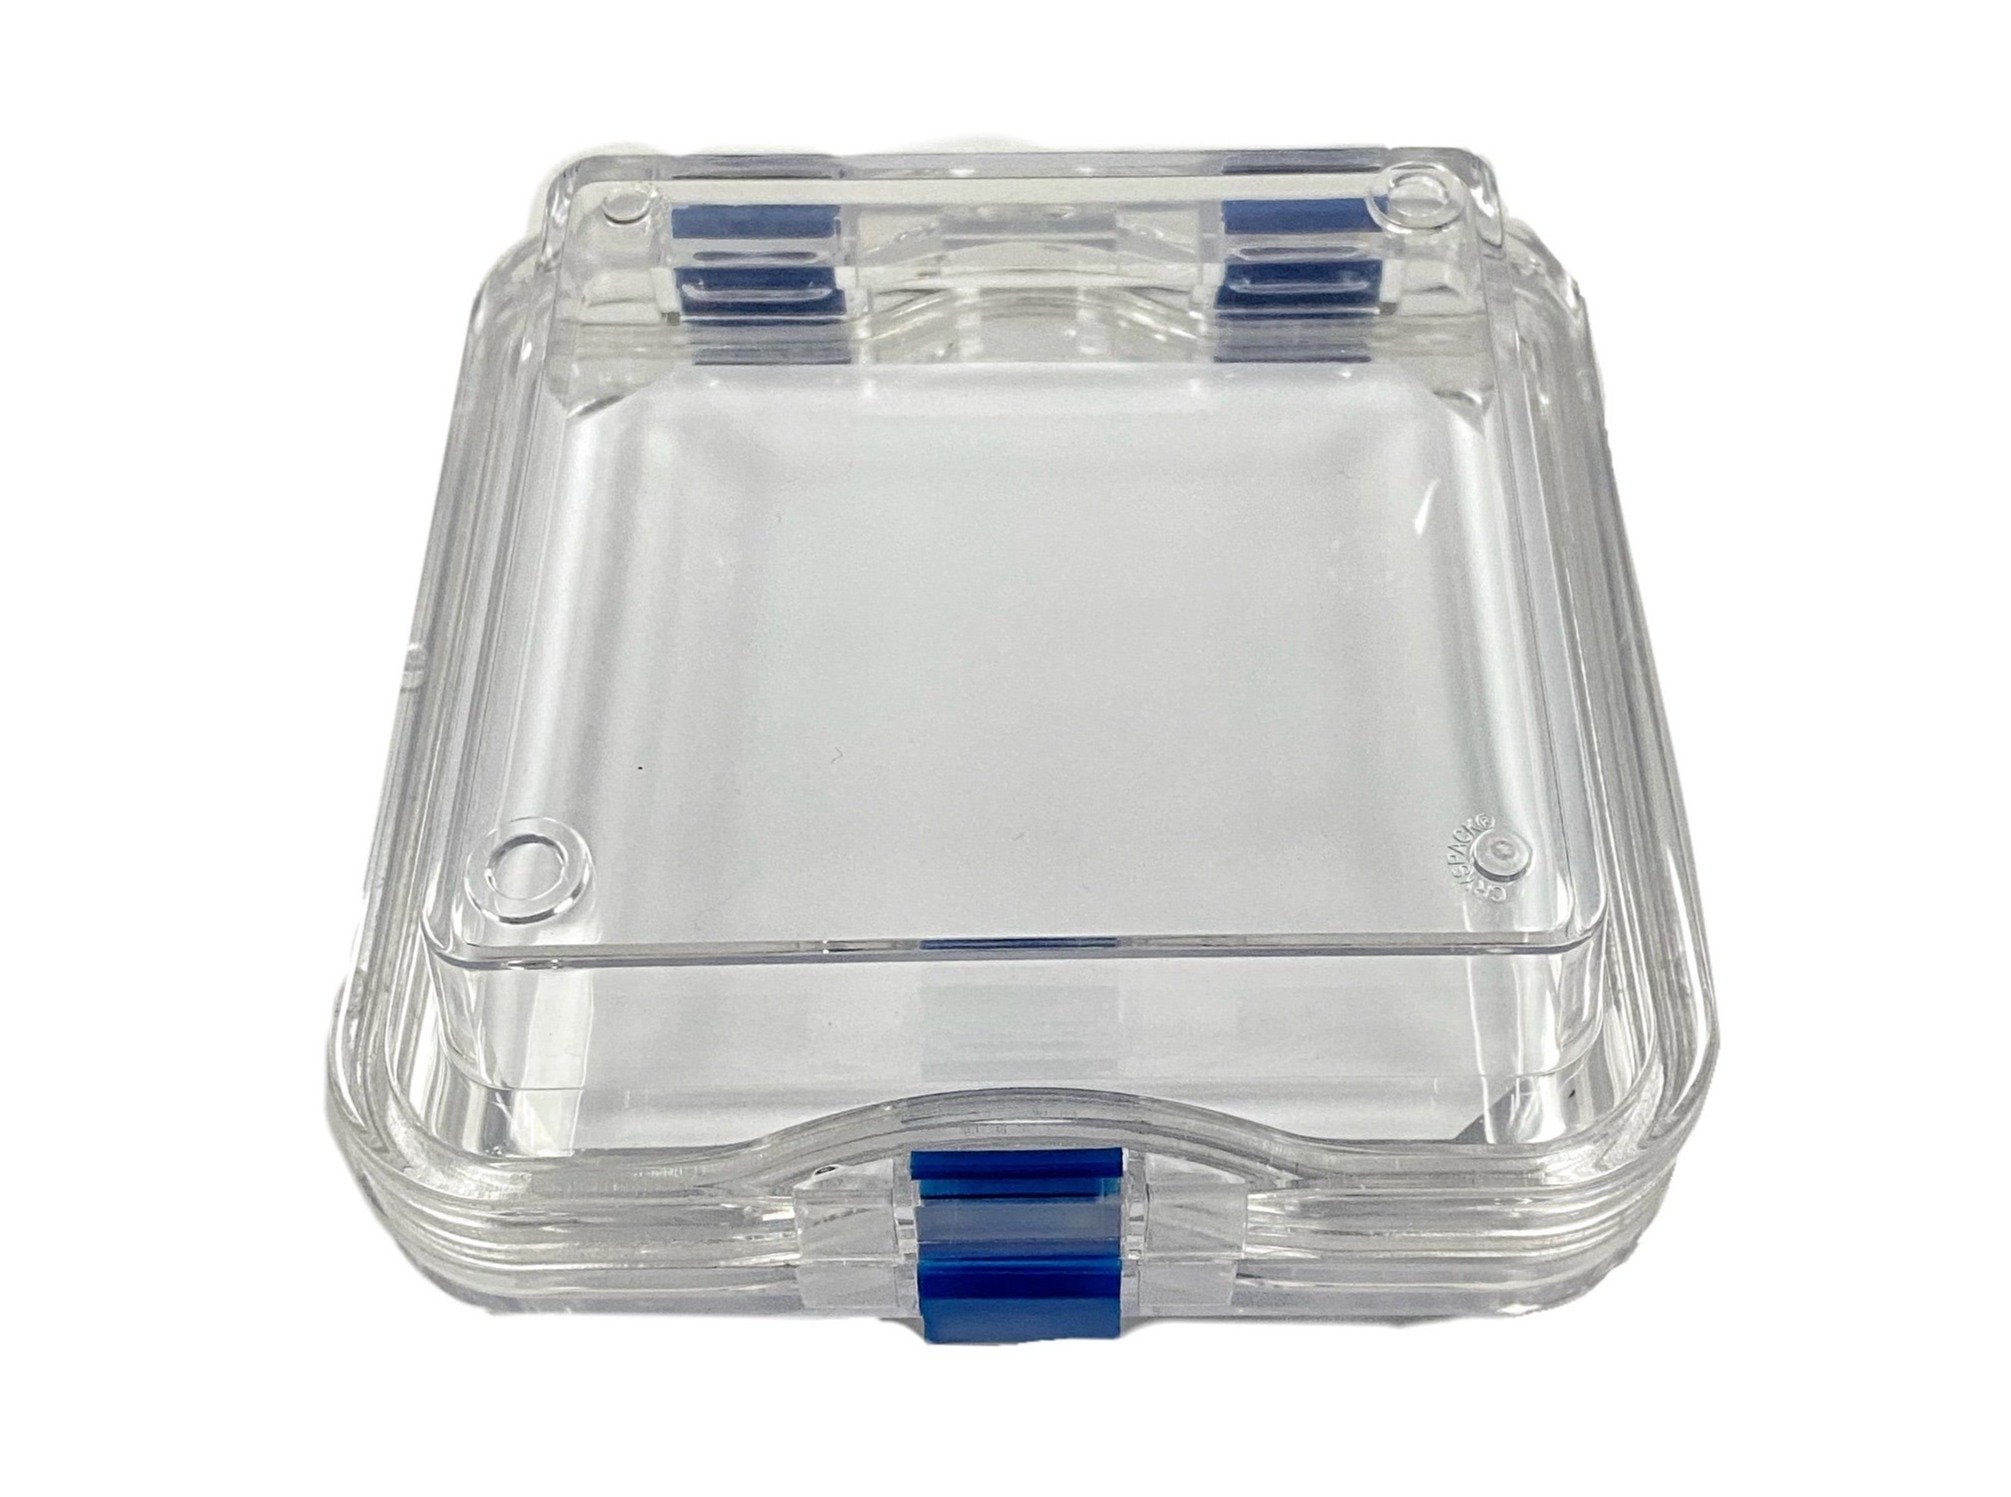 Pack of 12 MSE PRO Plastic Membrane Boxes (38x38x17 mm) for